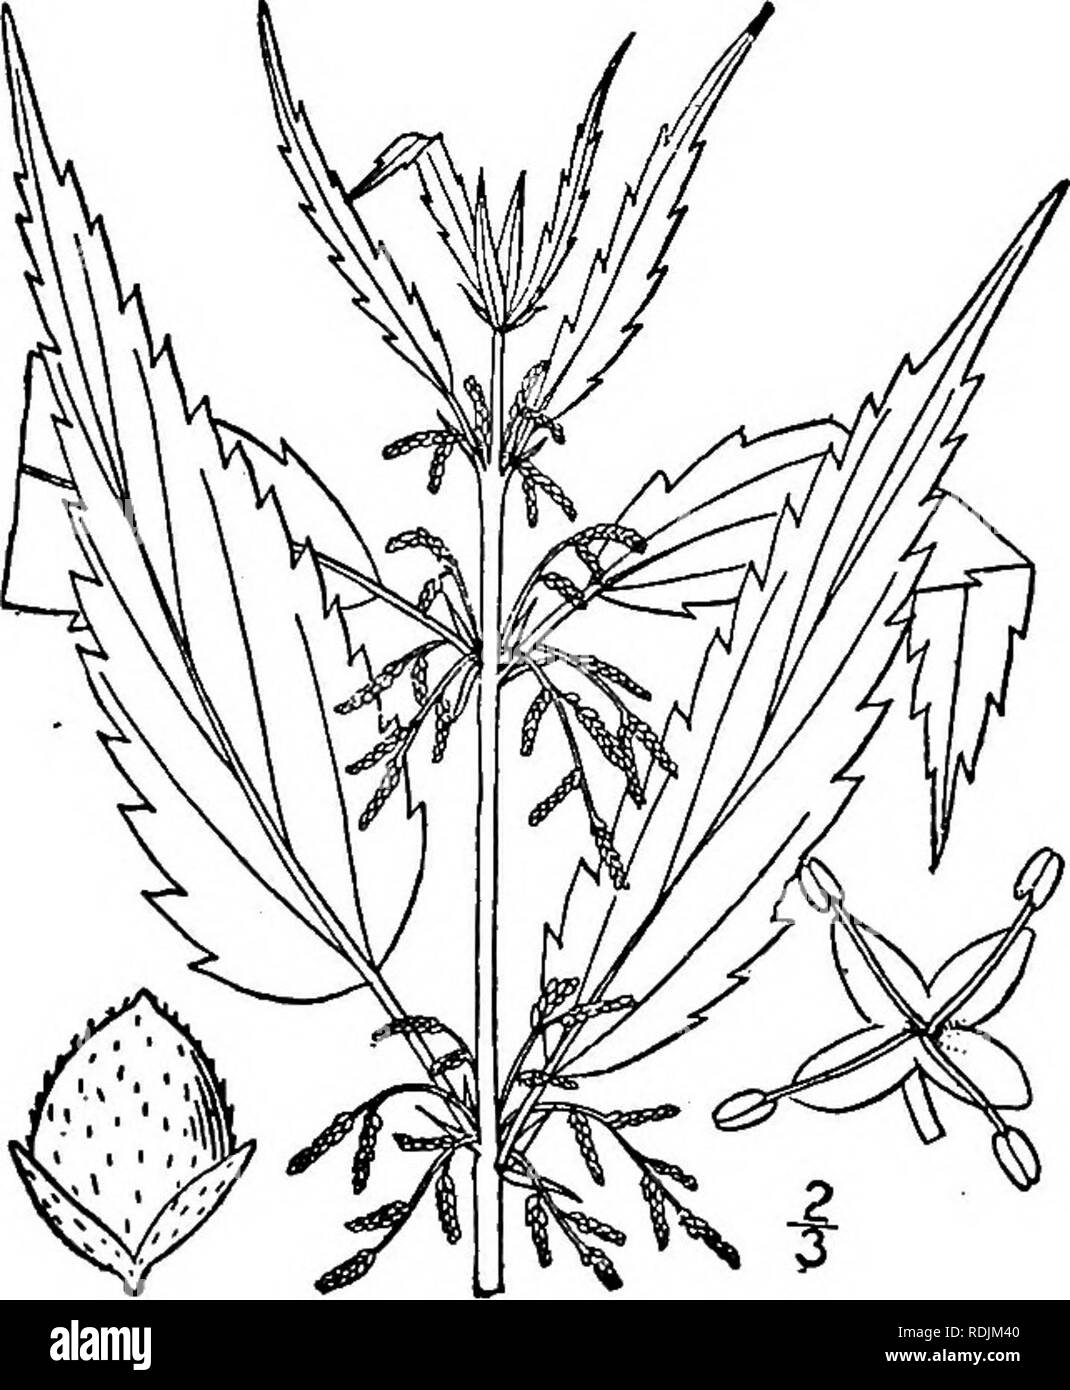 . An illustrated flora of the northern United States, Canada and the British possessions, from Newfoundland to the parallel of the southern boundary of Virginia, and from the Atlantic Ocean westward to the 102d meridian. Botany; Botany. Genus i. NETTLE FAMILY. 635 i. Urtica dioica L. Stinging or Great Nettle. Fig. 1556. Urtica dioica L. Sp. PI. 984. 1753. Perennial, densely beset with stinging hairs, stem rather stout, 2°-4° tall, puberulent above. Leaves thin, ovate, long-petioled, acute or acuminate at the apex, cordate at the base, sharply or incisely serrate with triangular or lanceolate a Stock Photo